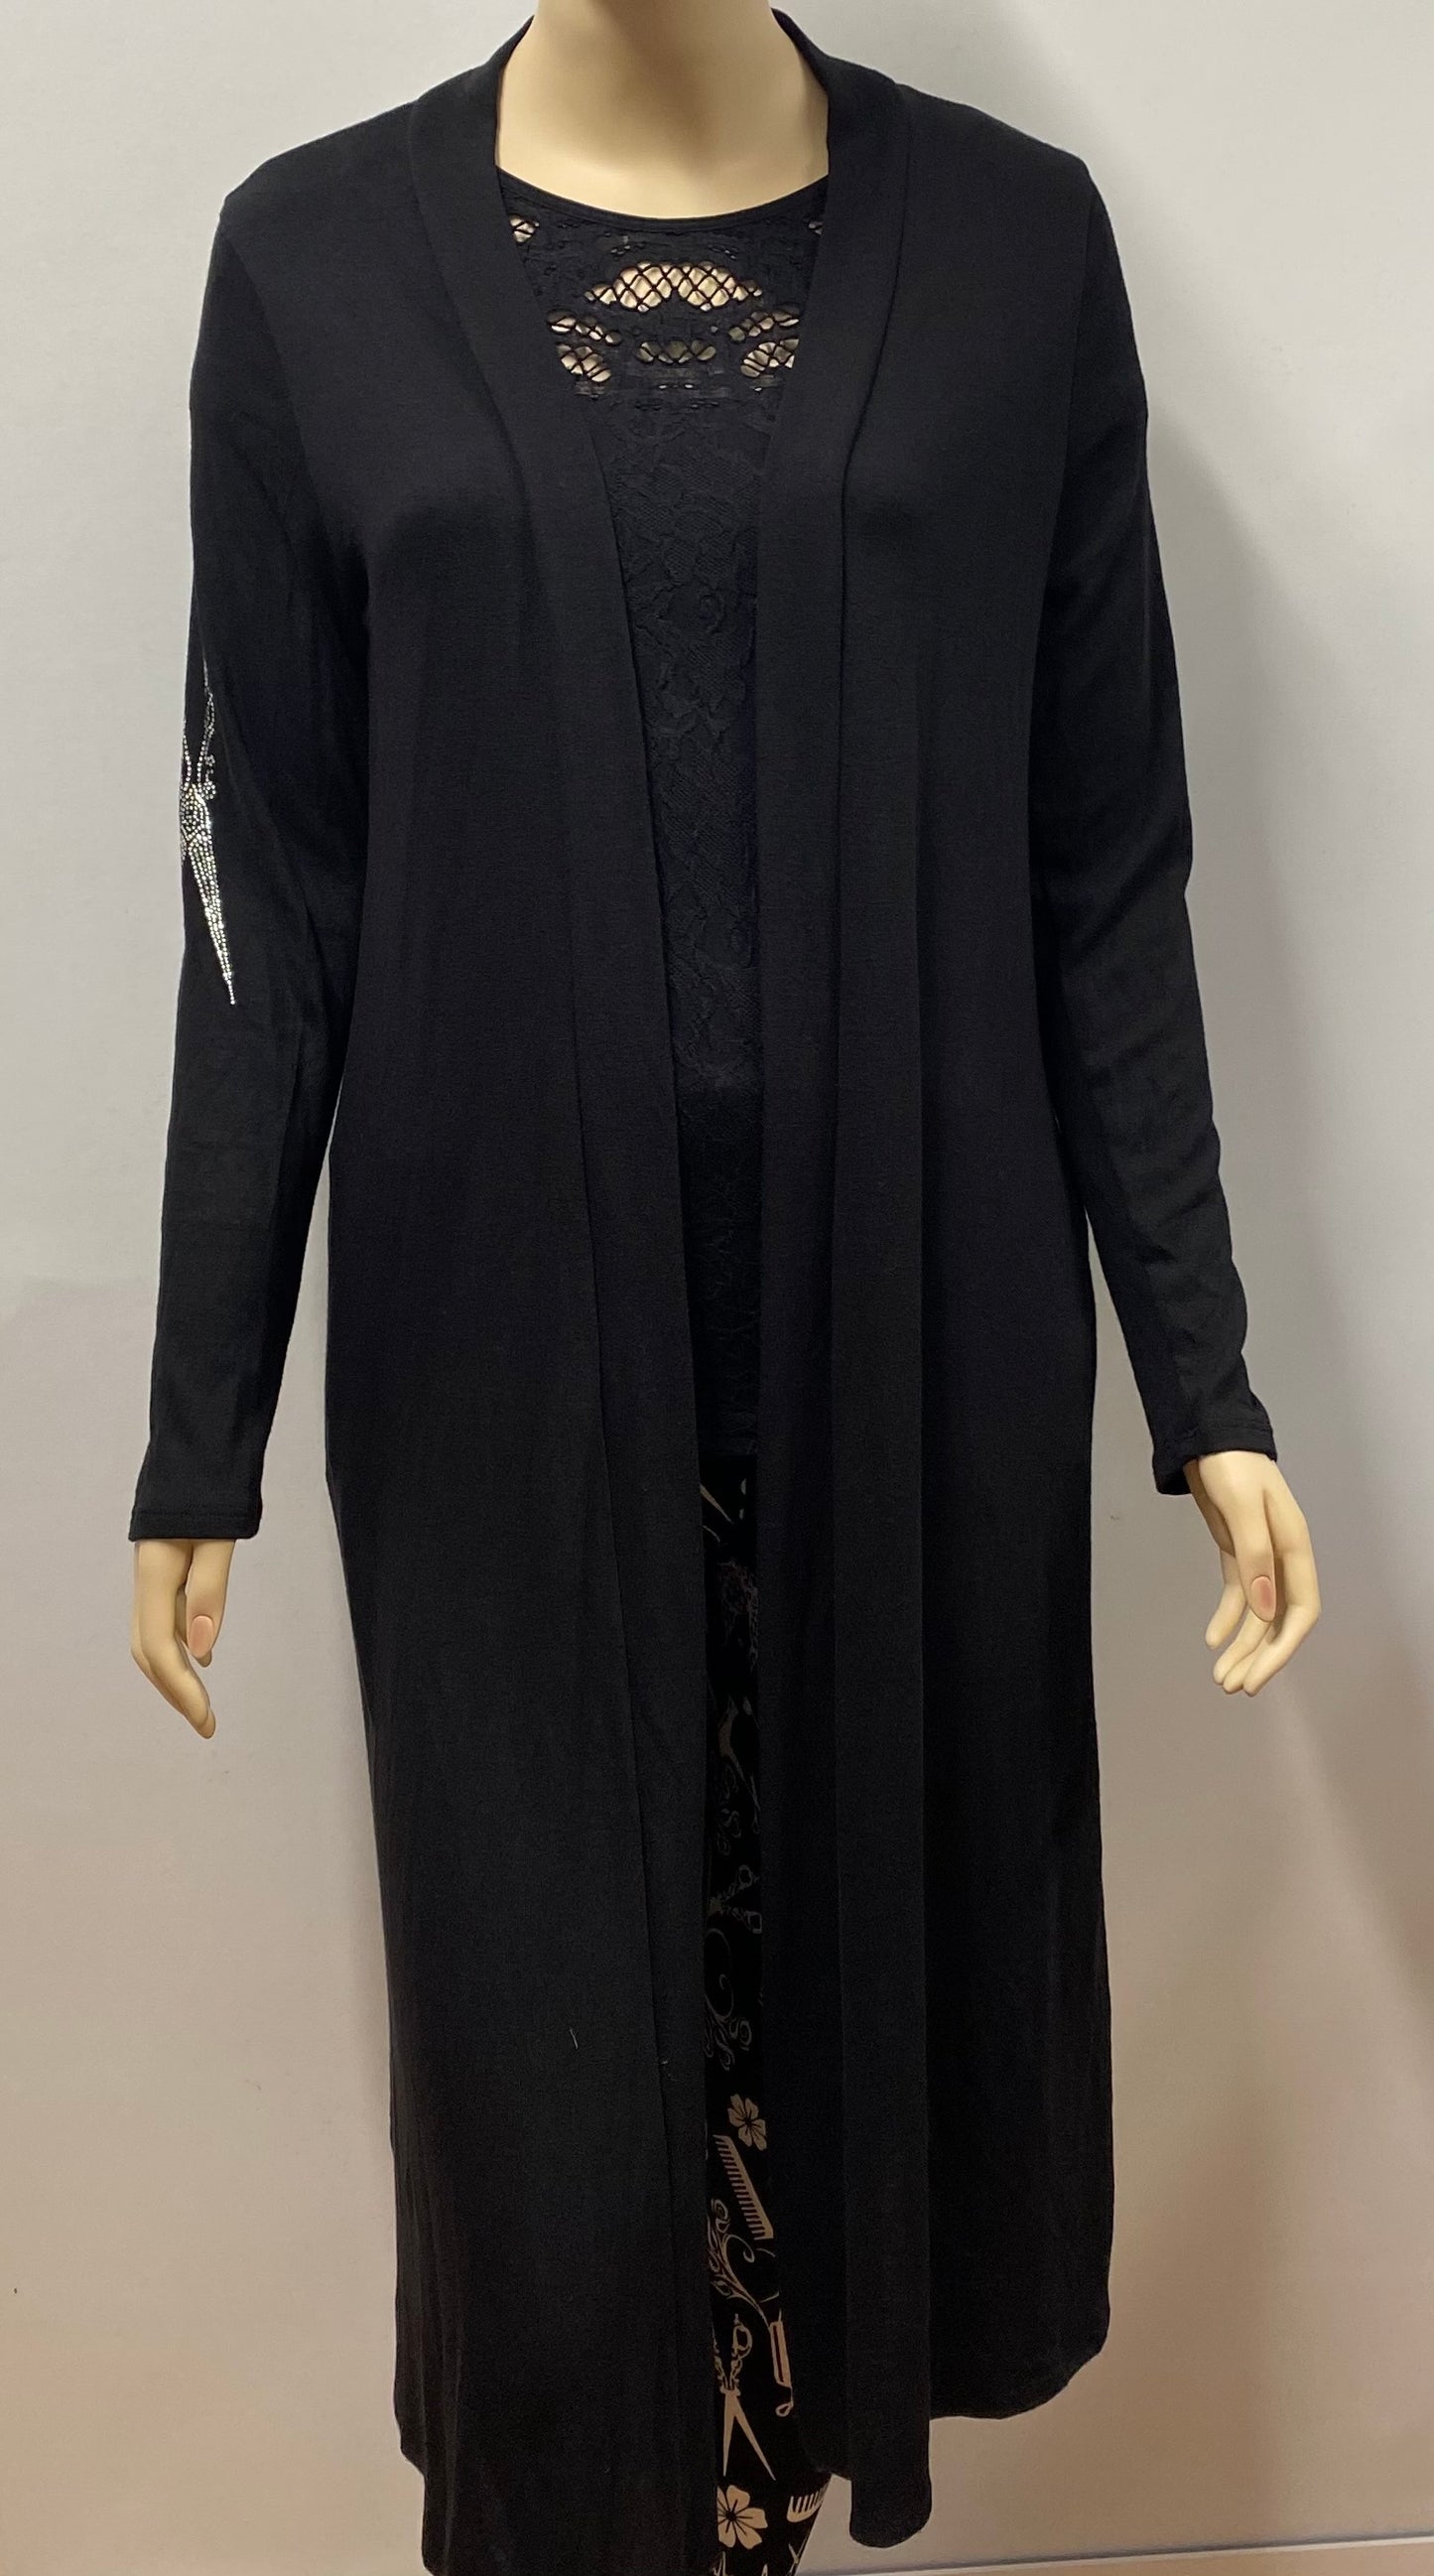 Stylist Cardigan with Pockets and Scissor Accent on Sleeves